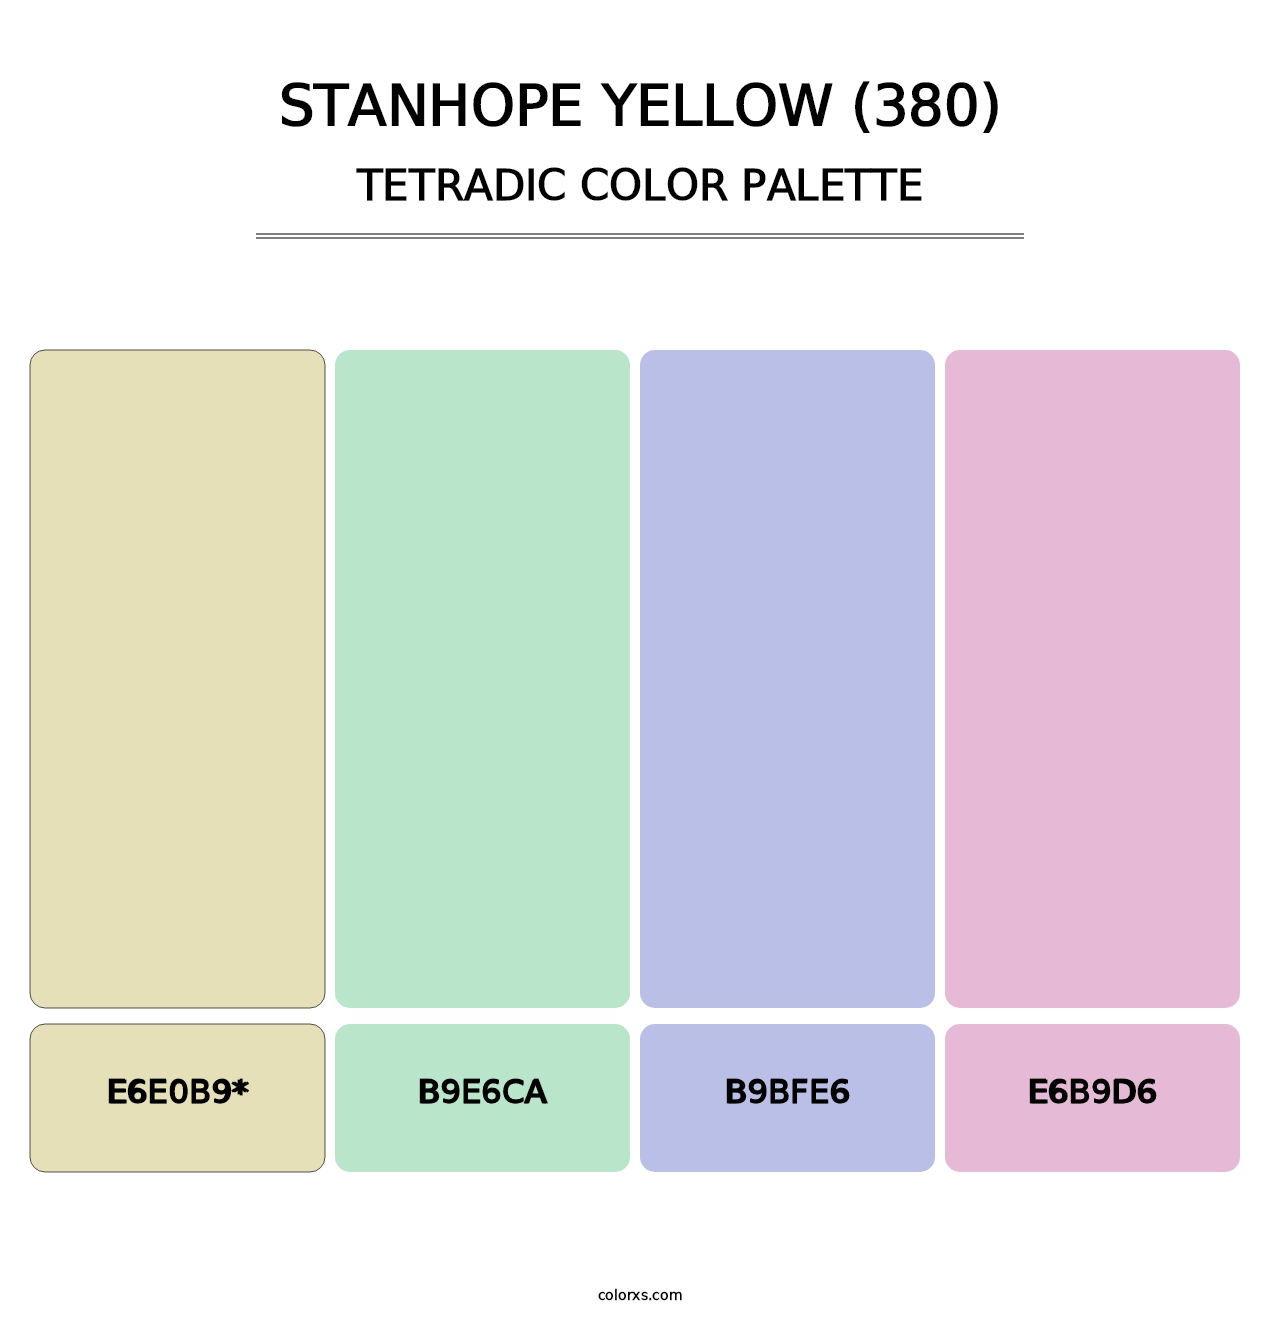 Stanhope Yellow (380) - Tetradic Color Palette